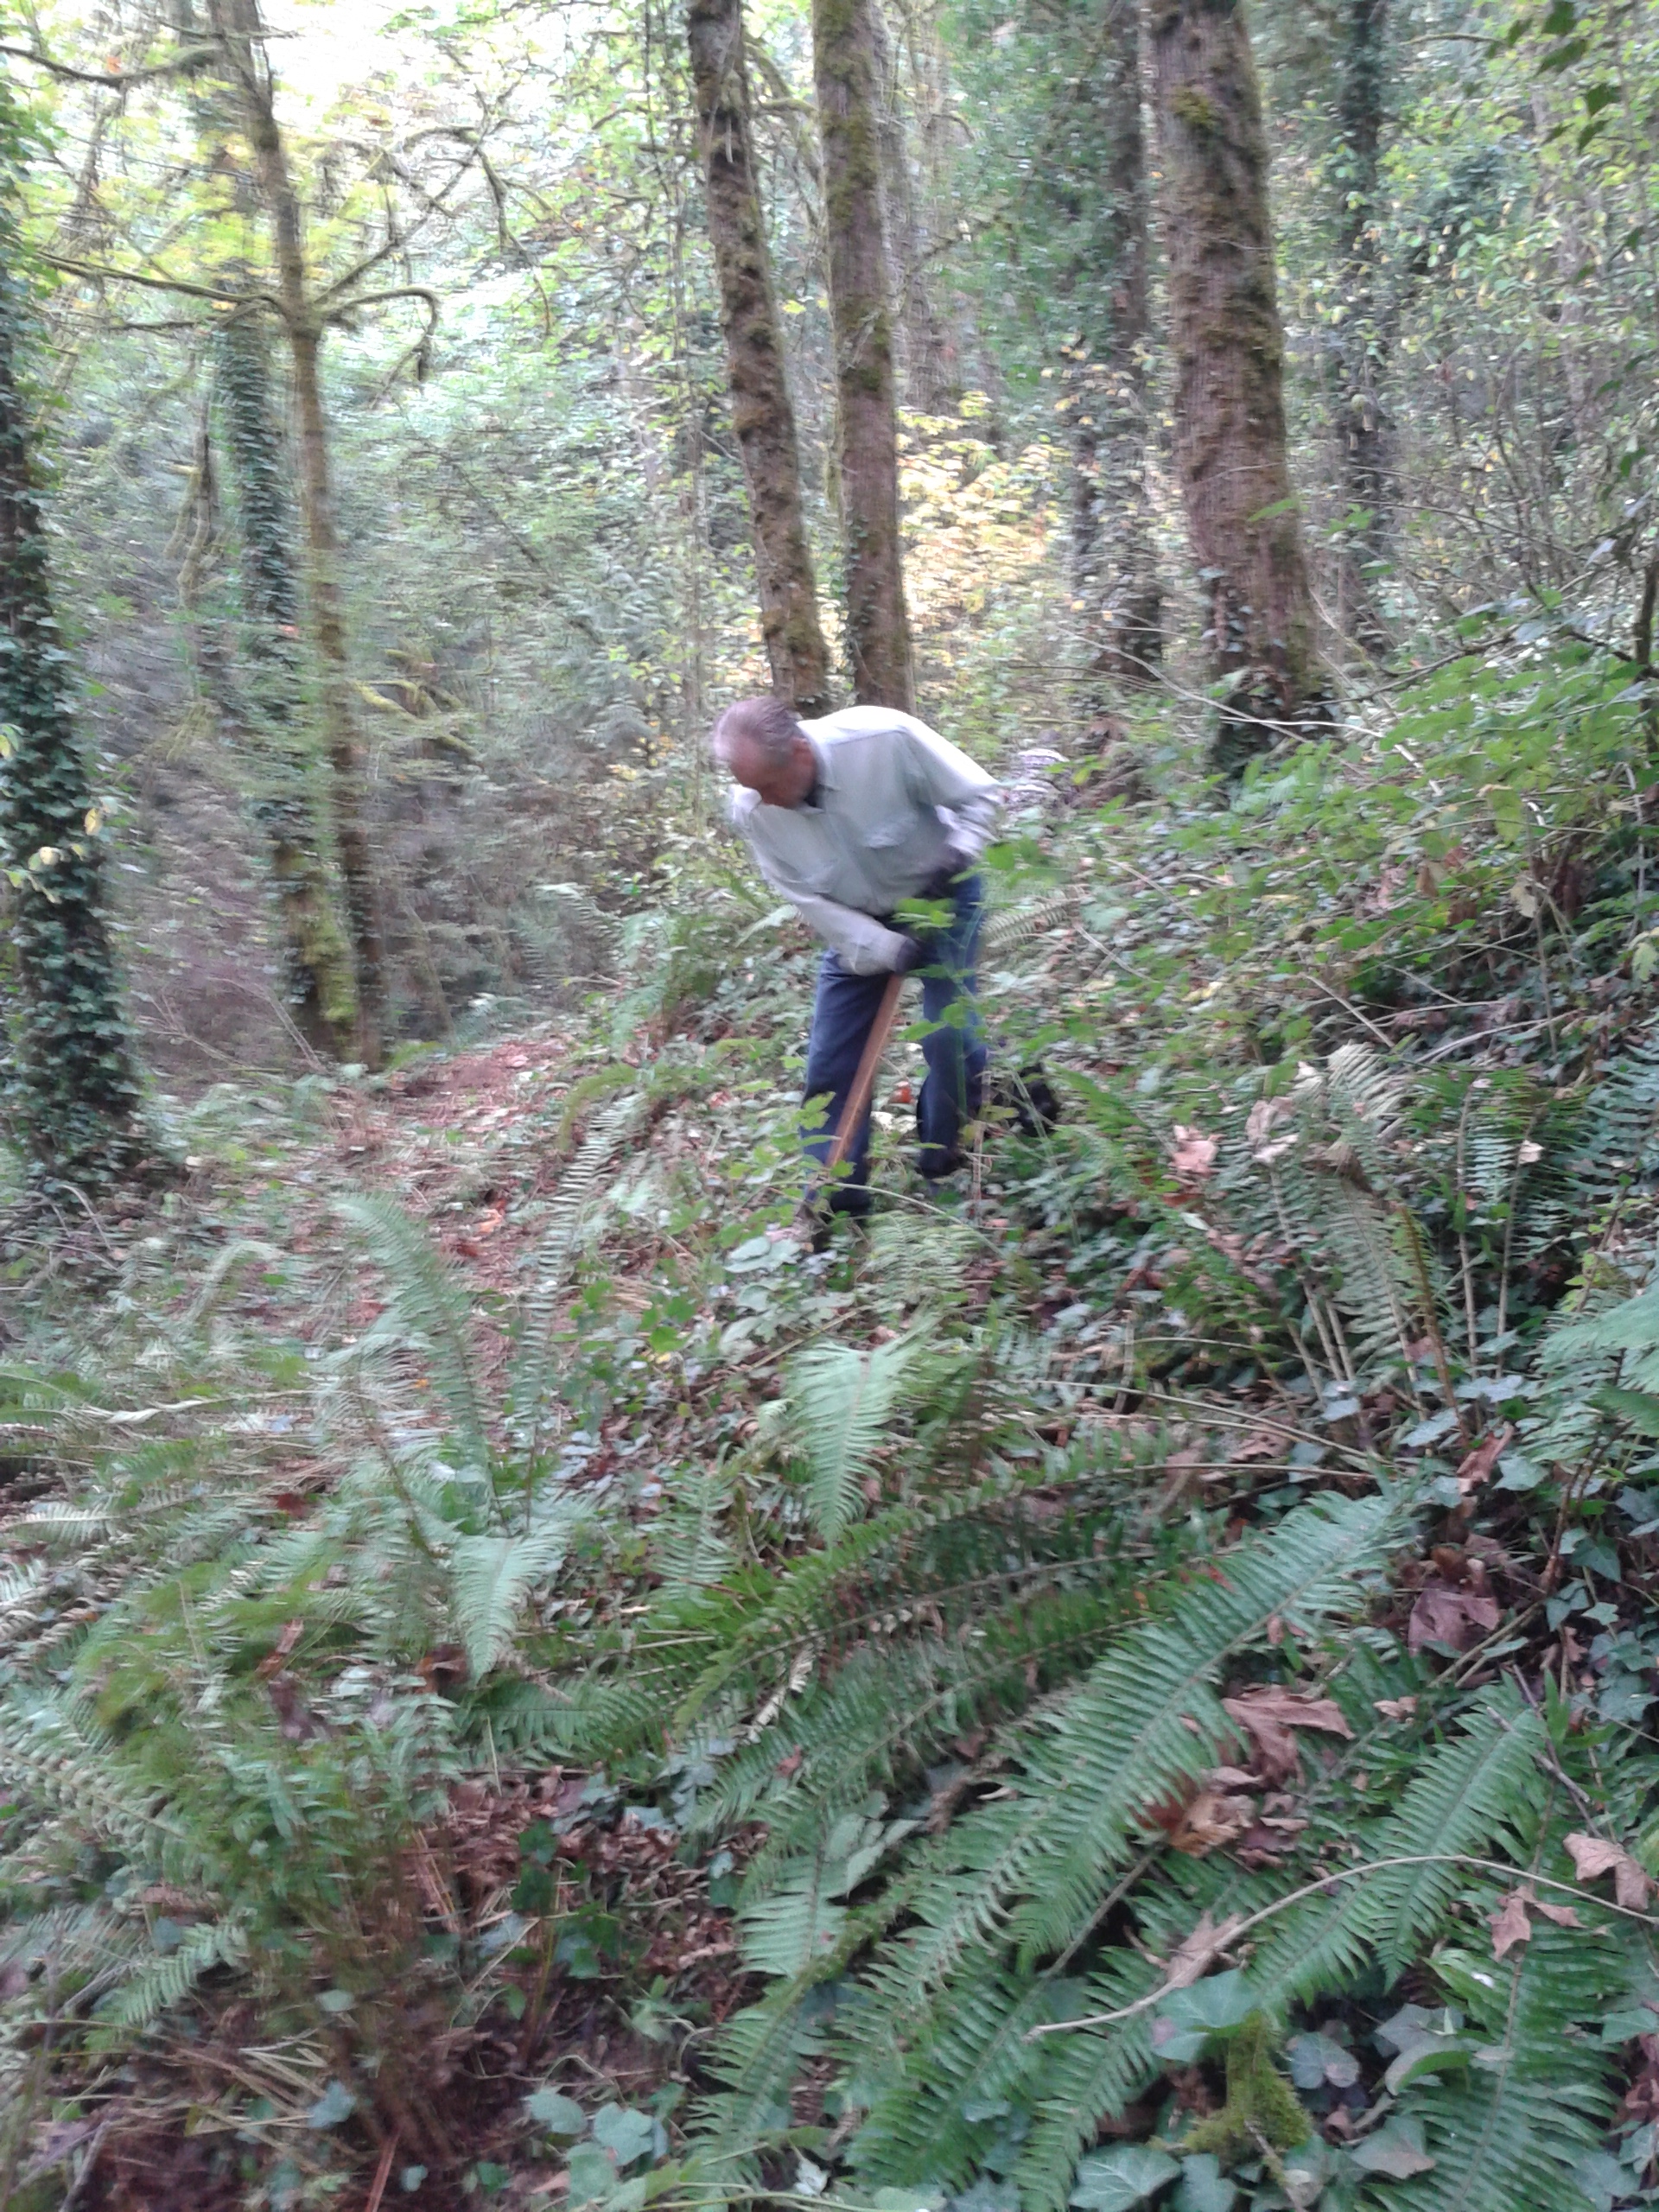 New alignment for trail that is not as steep as previous trail.  SW Trails volunteer is transplanting sword ferns that are in trail alignment.